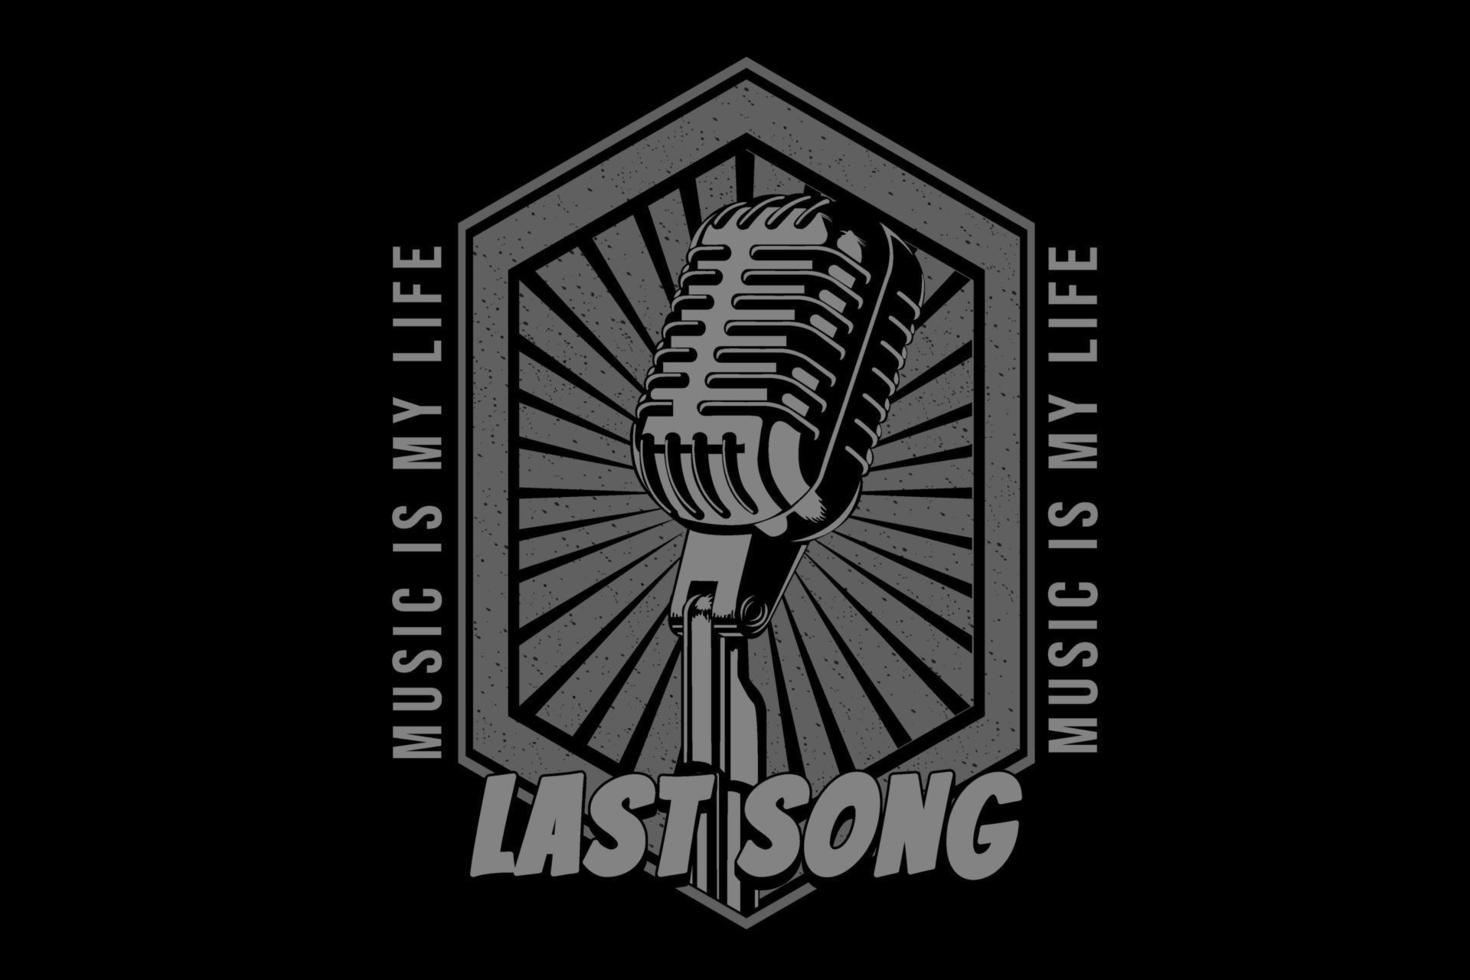 music is my life last song  typography design vector